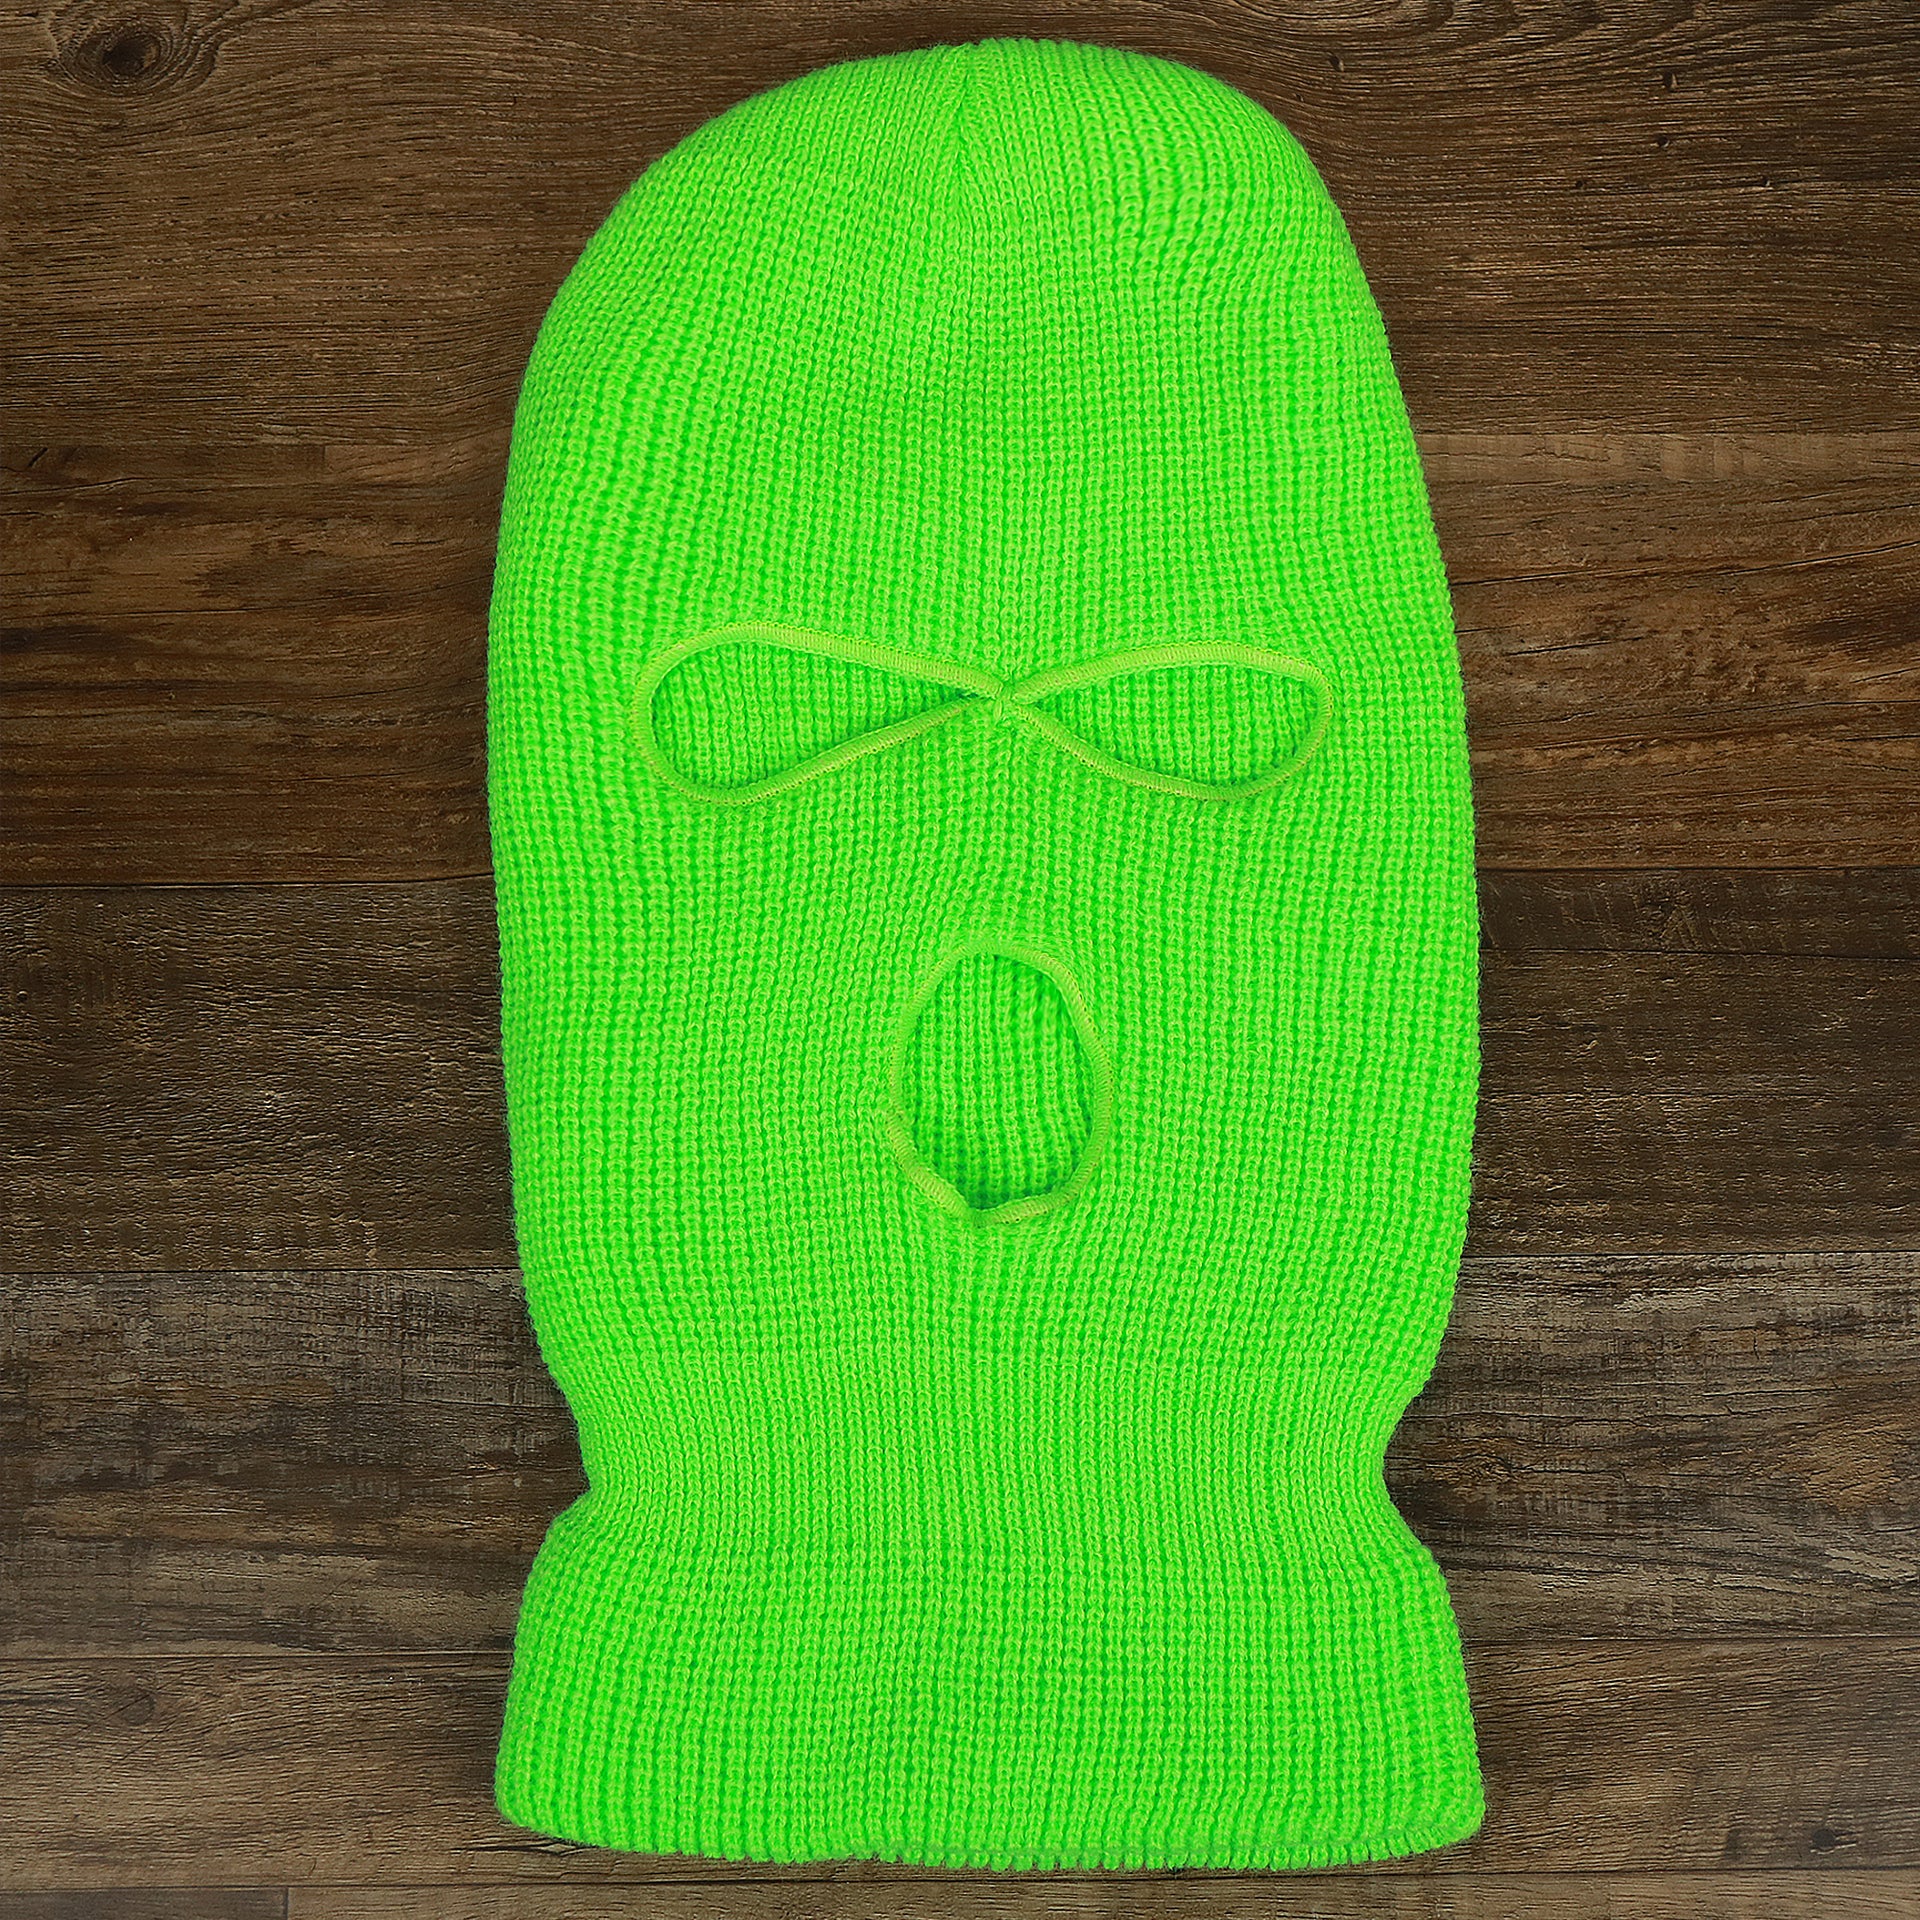 The Safety Green Snug Fit Three Hole Balaclava | Neon Green Knit Ski Mask on the ground